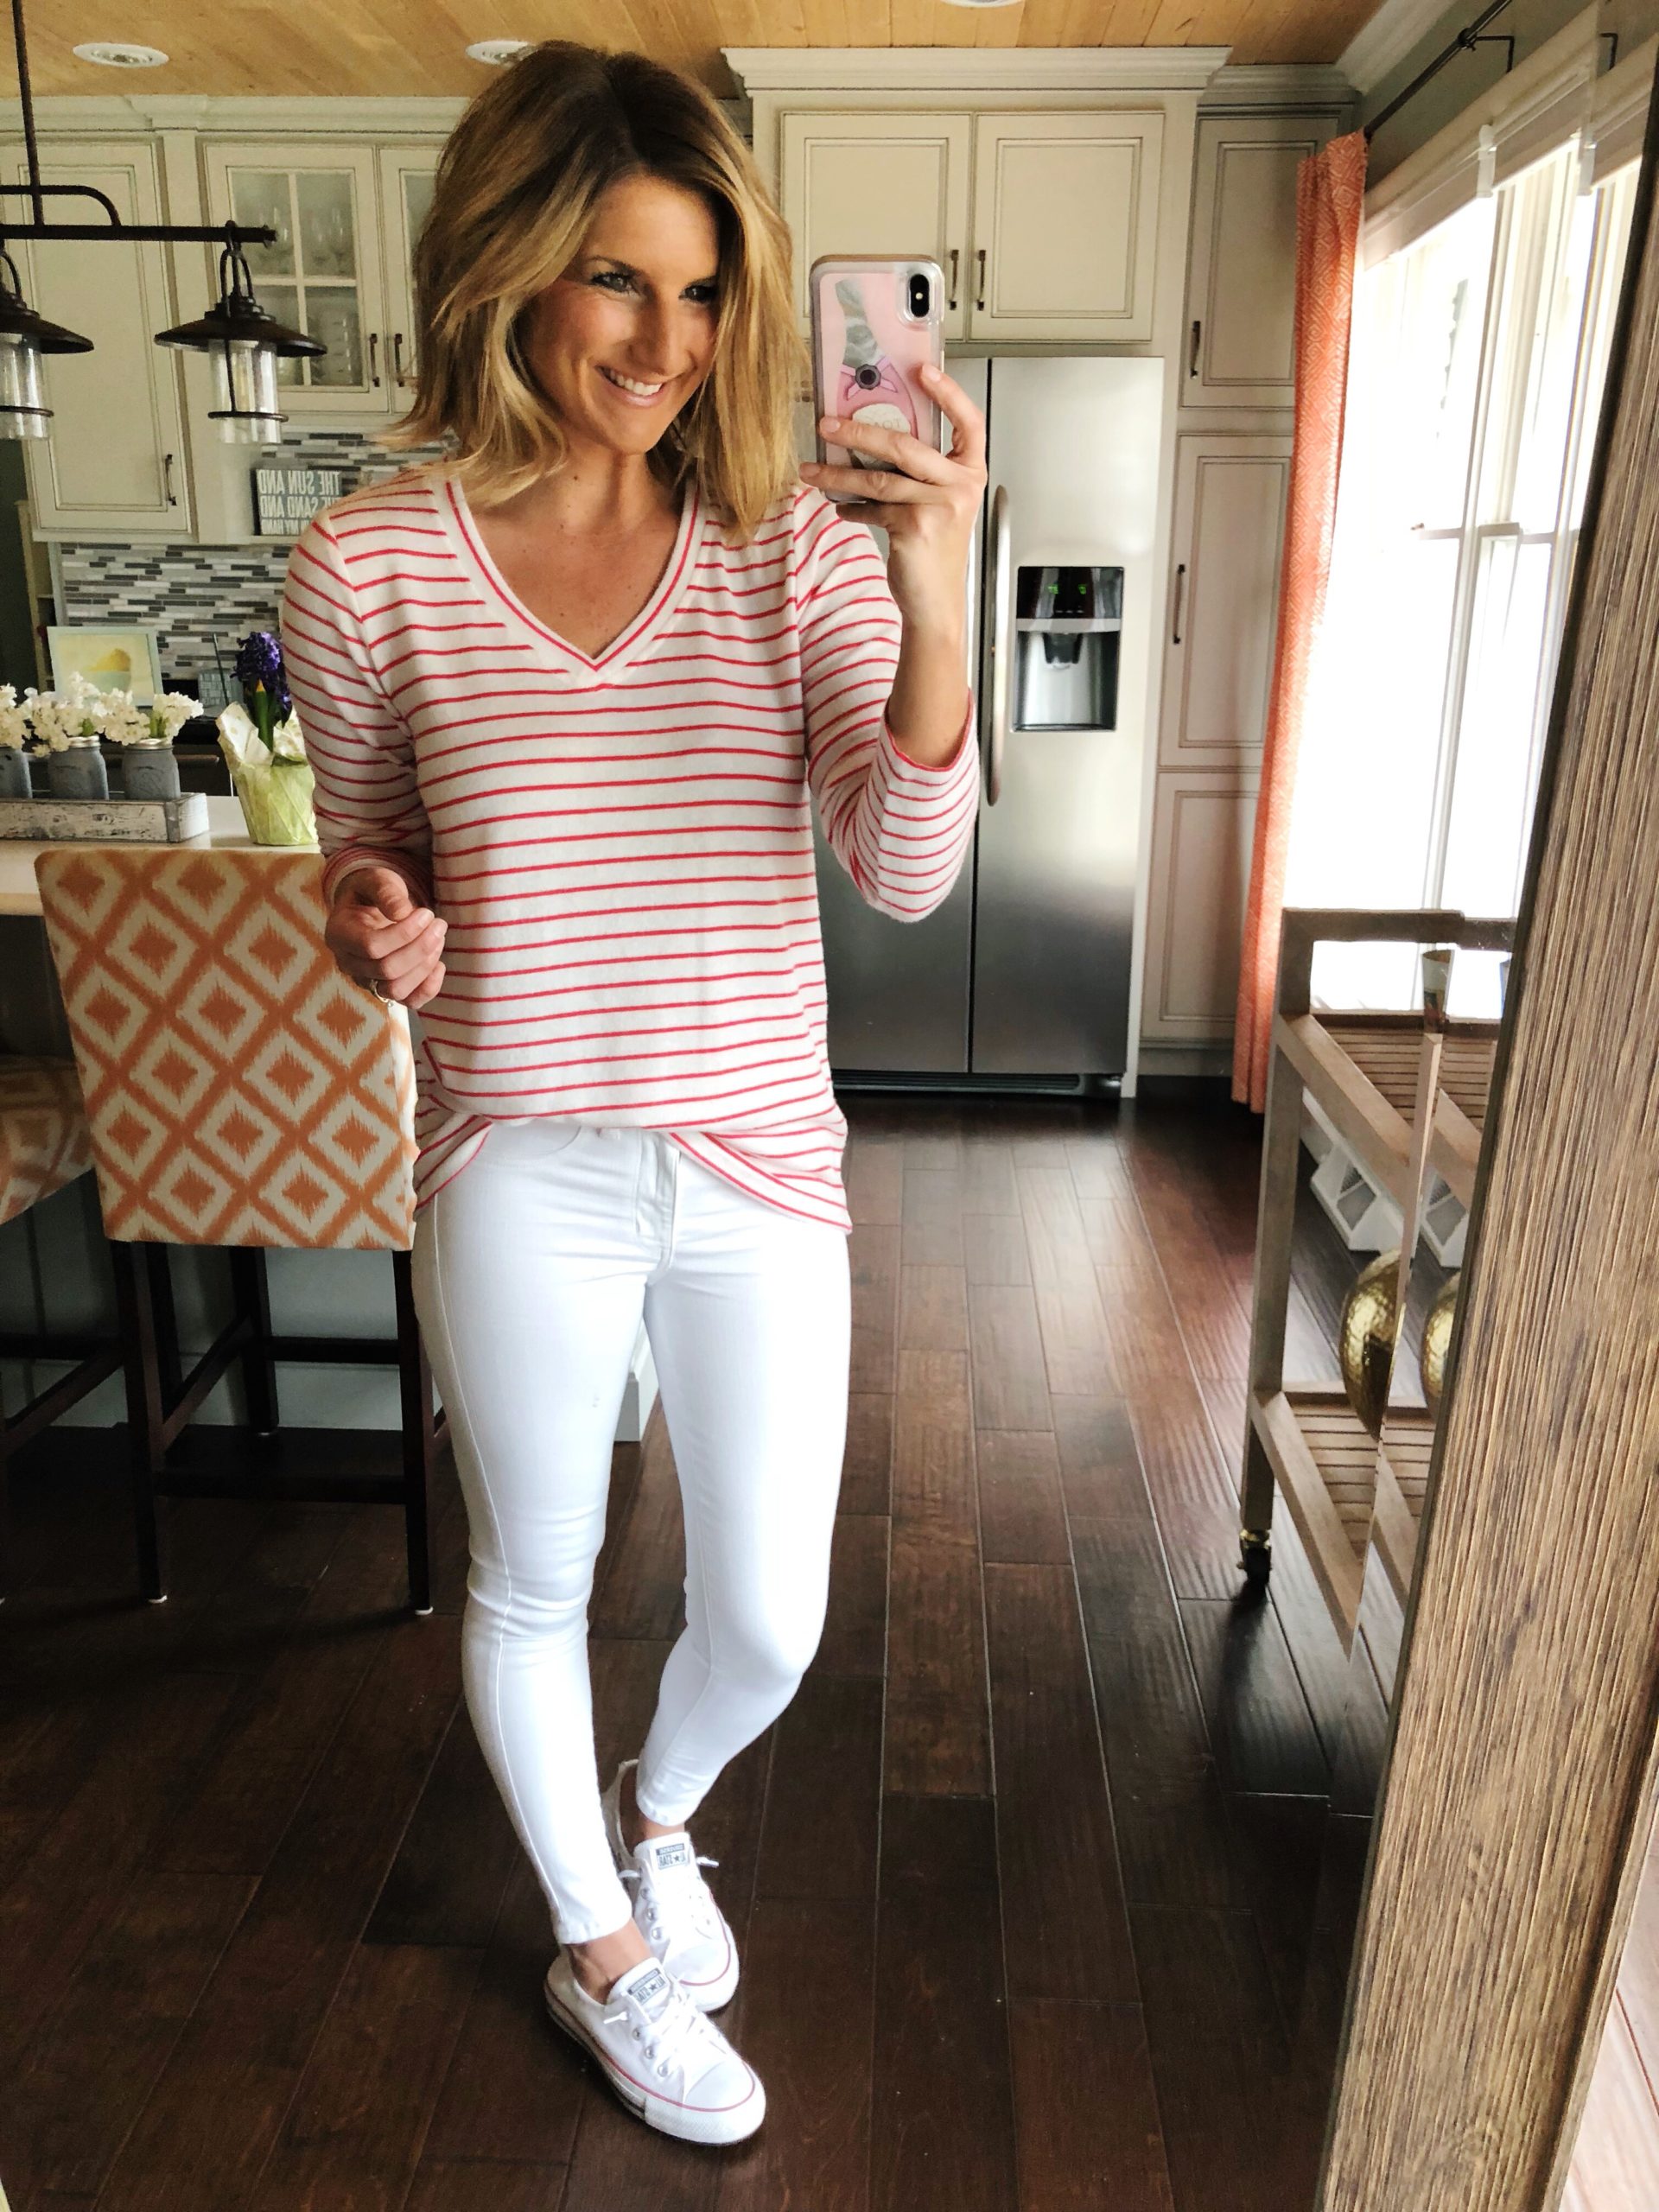 Simple Spring Outfit // Striped Top + White Skinny Jeans + Converse Shoreline Sneakers // Spring Fashion